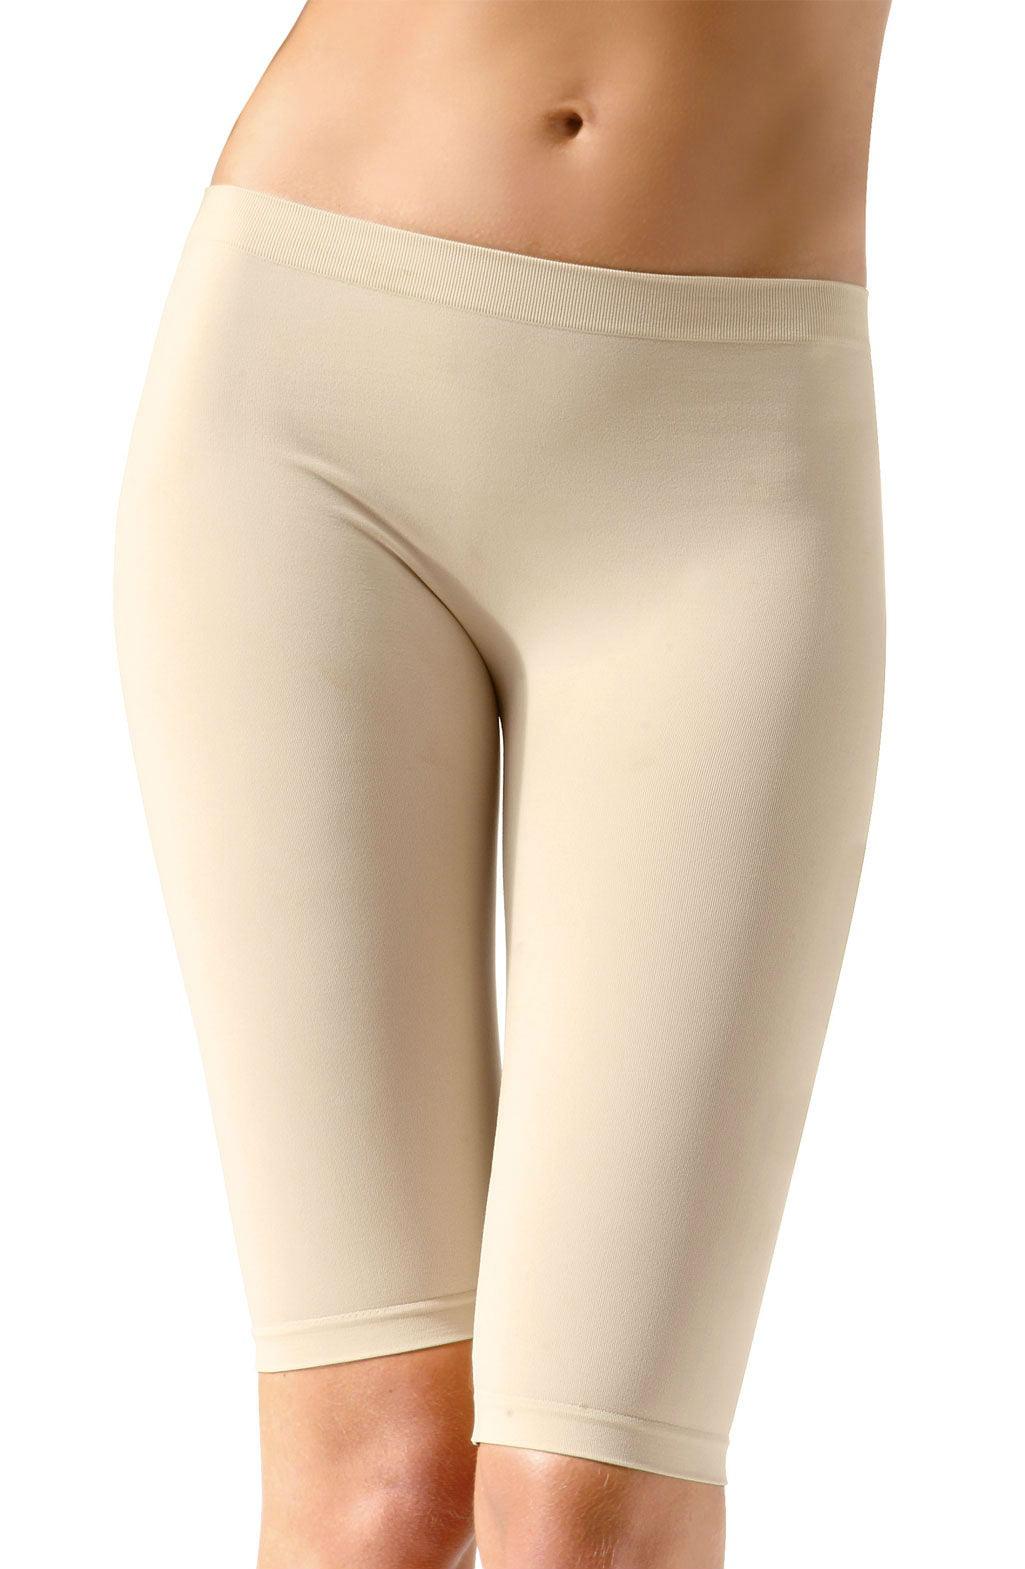 Control Body 410600 Infused Shaping Leggings Skin-Katys Boutique